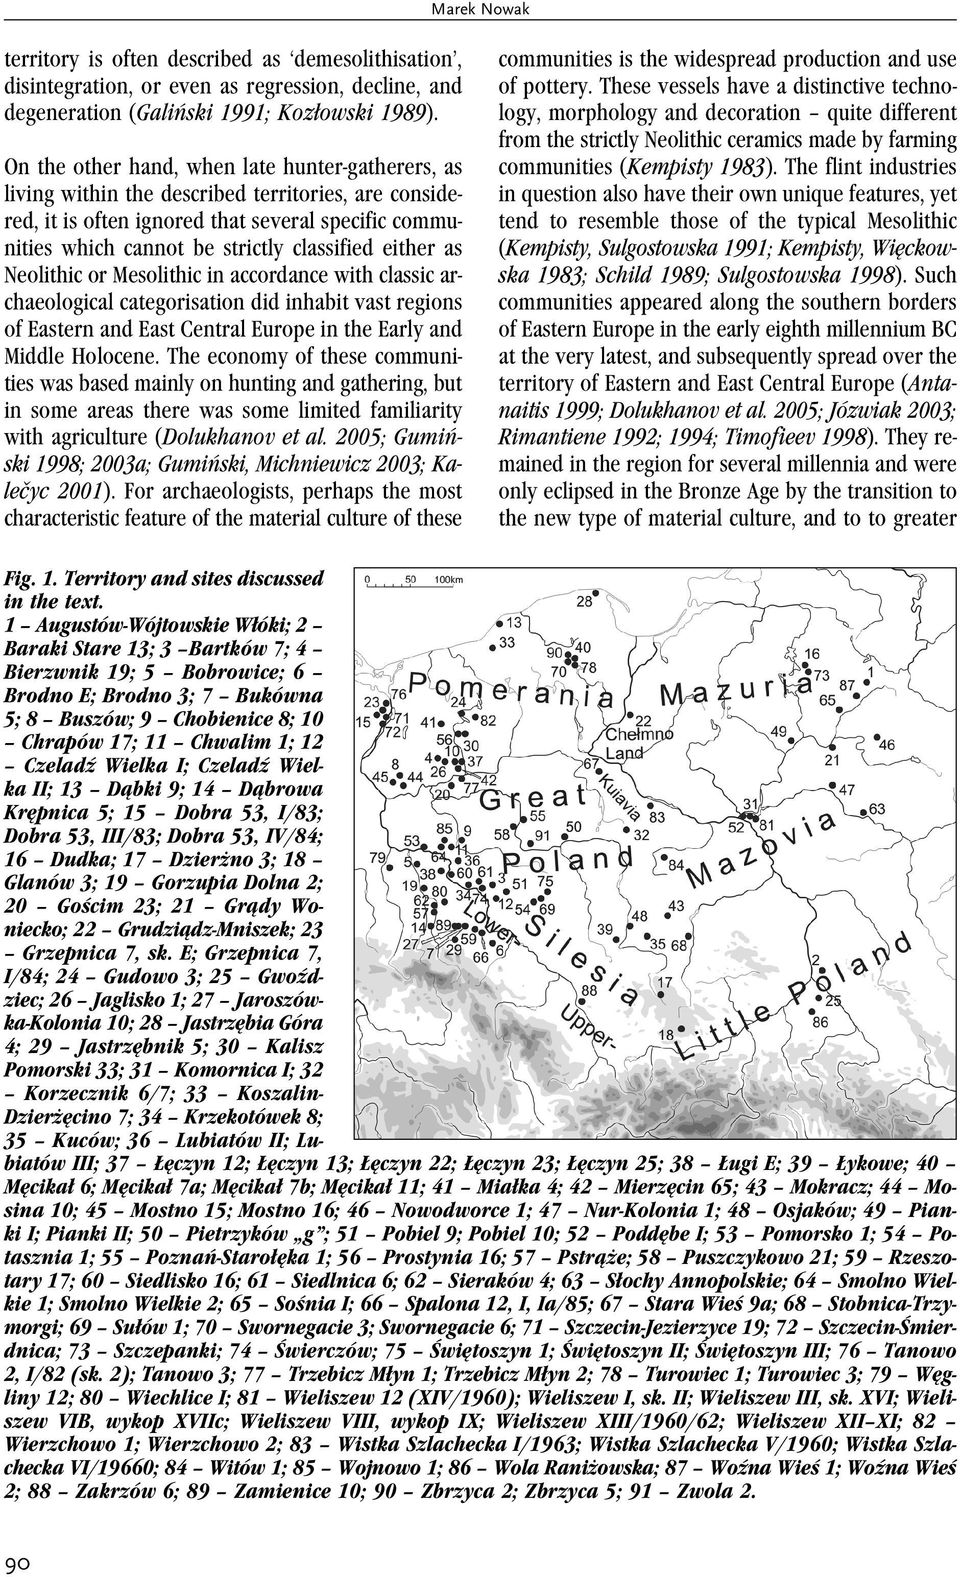 either as Neolithic or Mesolithic in accordance with classic archaeological categorisation did inhabit vast regions of Eastern and East Central Europe in the Early and Middle Holocene.